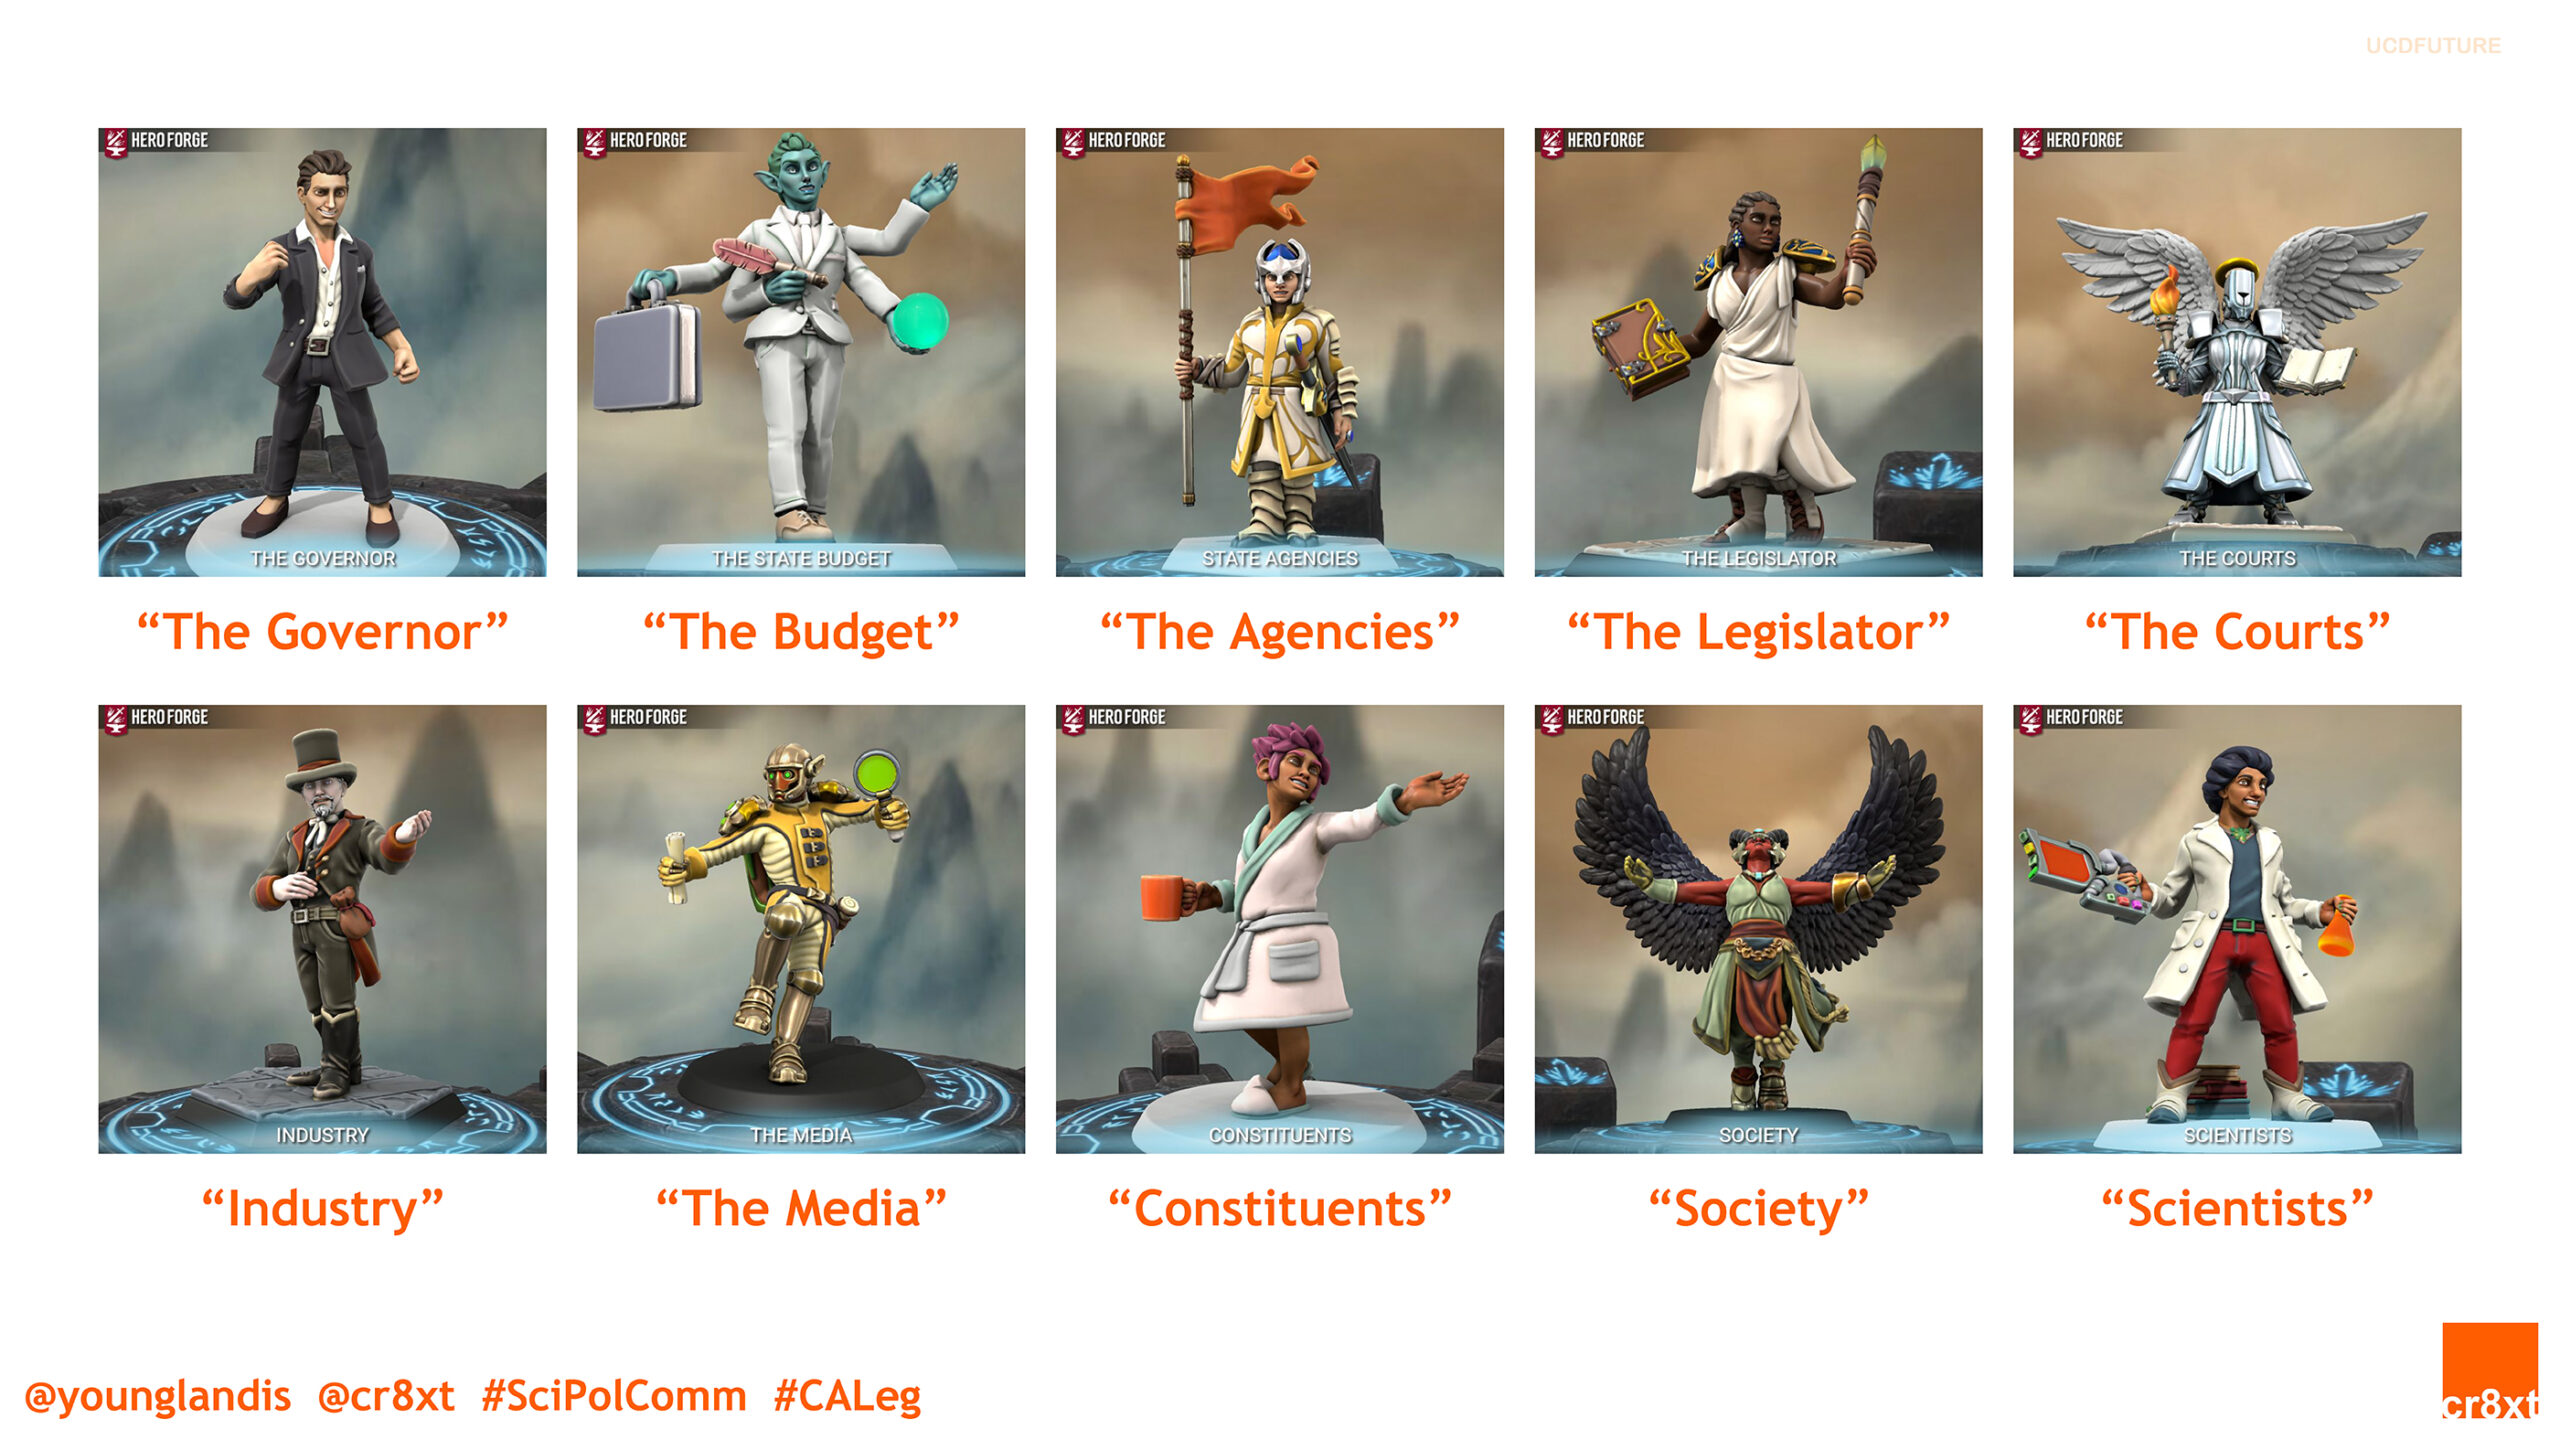 A screenshot of a lecture slide depicting 10 policy characters as 3-D illustrations generated by Hero Forge: The Governor, The Budget, The Agencies, The Legislator, The Courts, Industry, The Media, Constituents, Society, and Scientists. Each appears like a mythical or futuristic figure, although The Governor is a charicature of Governor Gavin Newsom. The footer reads at Young Landis at C R 8 X T hashtag sci pol comm hashtag C A L E G, and the Creative Externalities square logo.